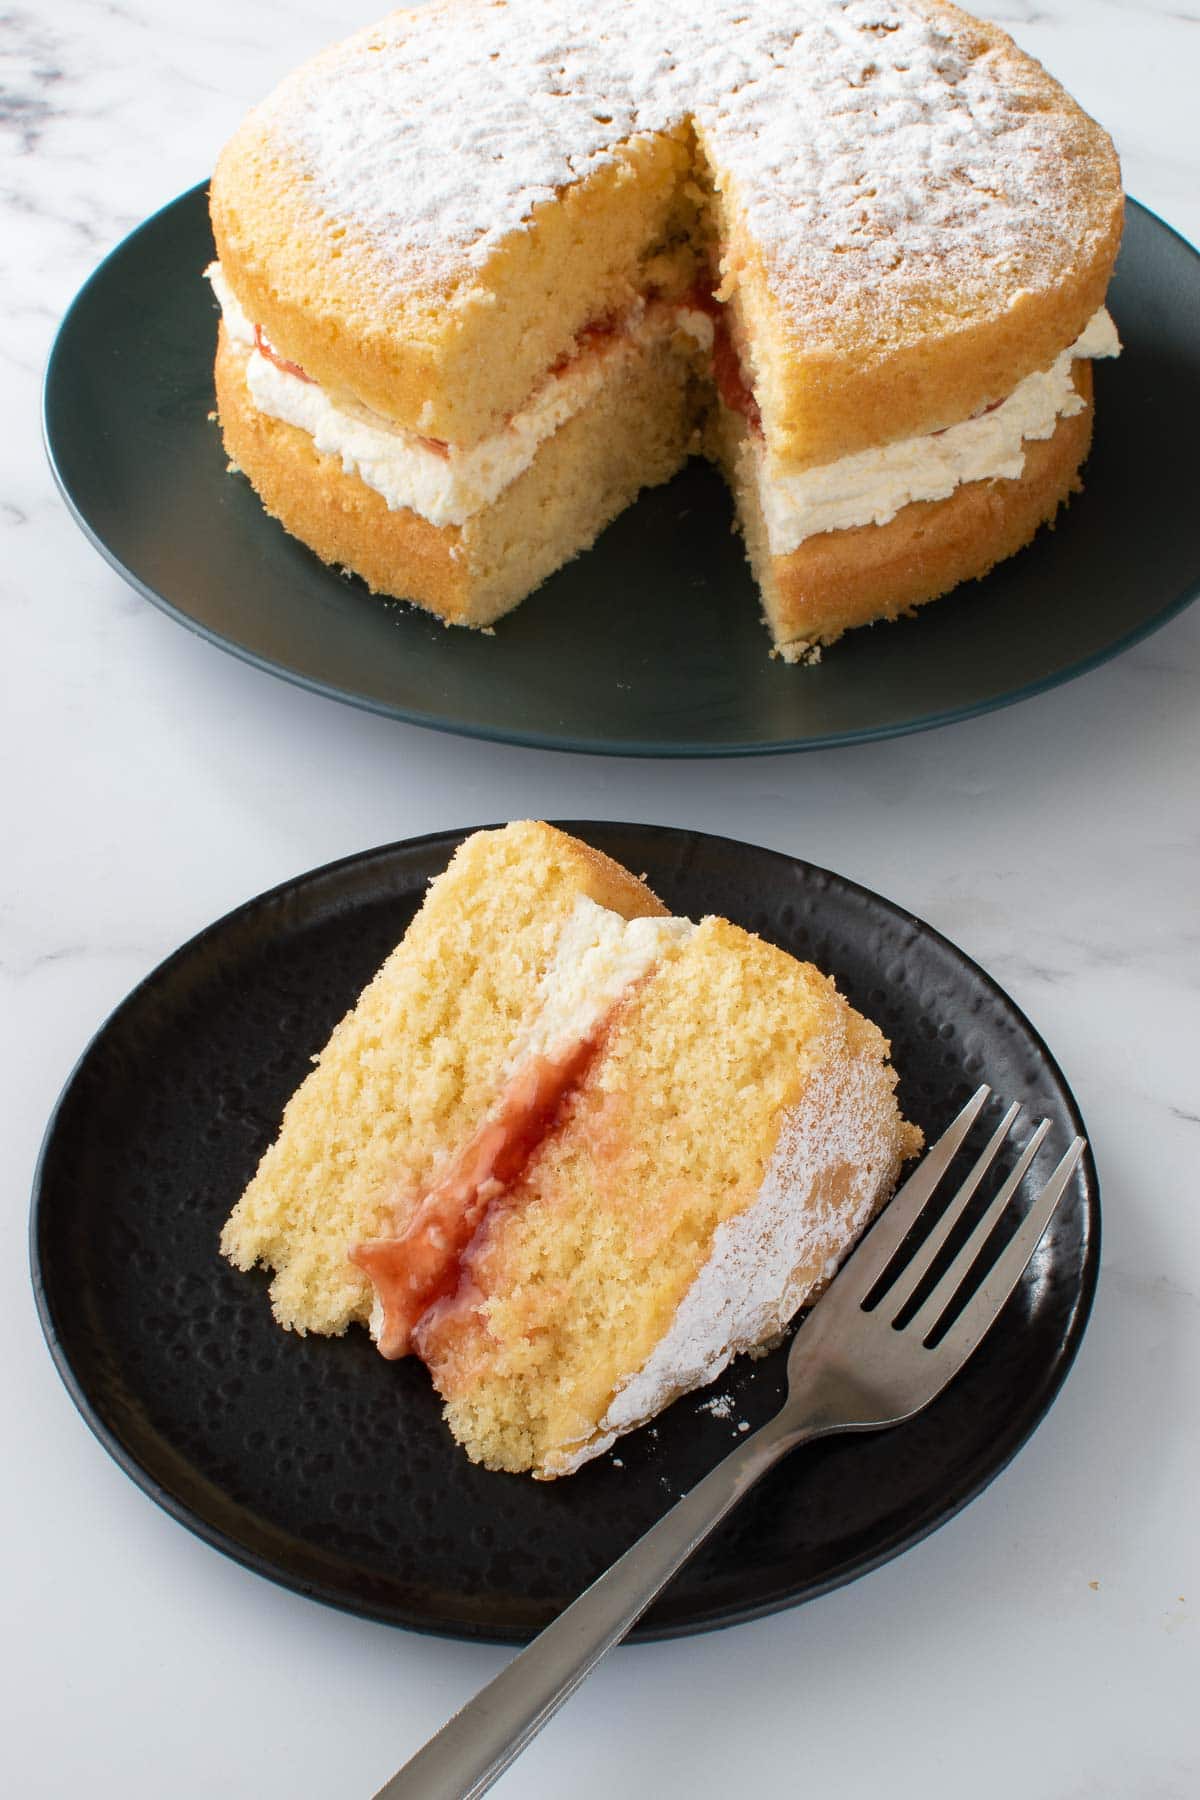 Victoria sponge cake with a slice cut out and plated on the side.